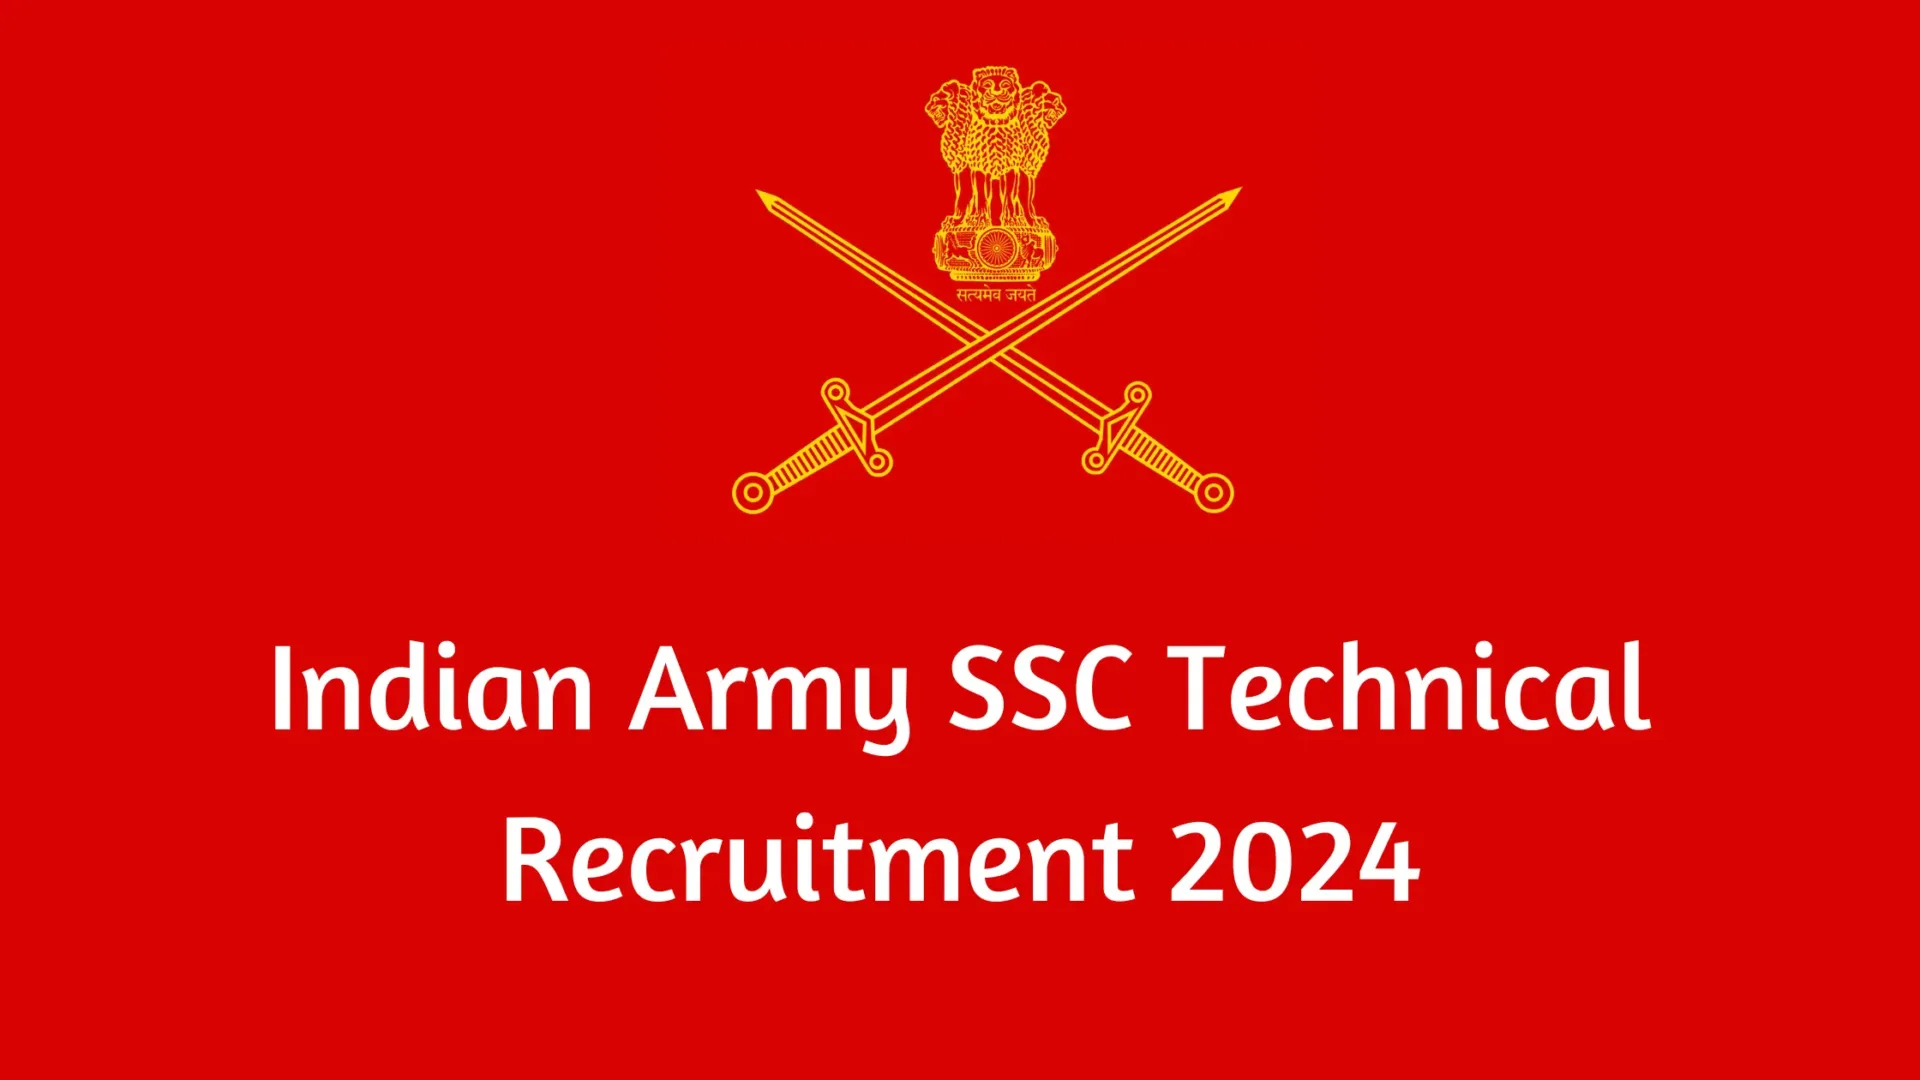 Indian Army SSC Technical Recruitment 2024